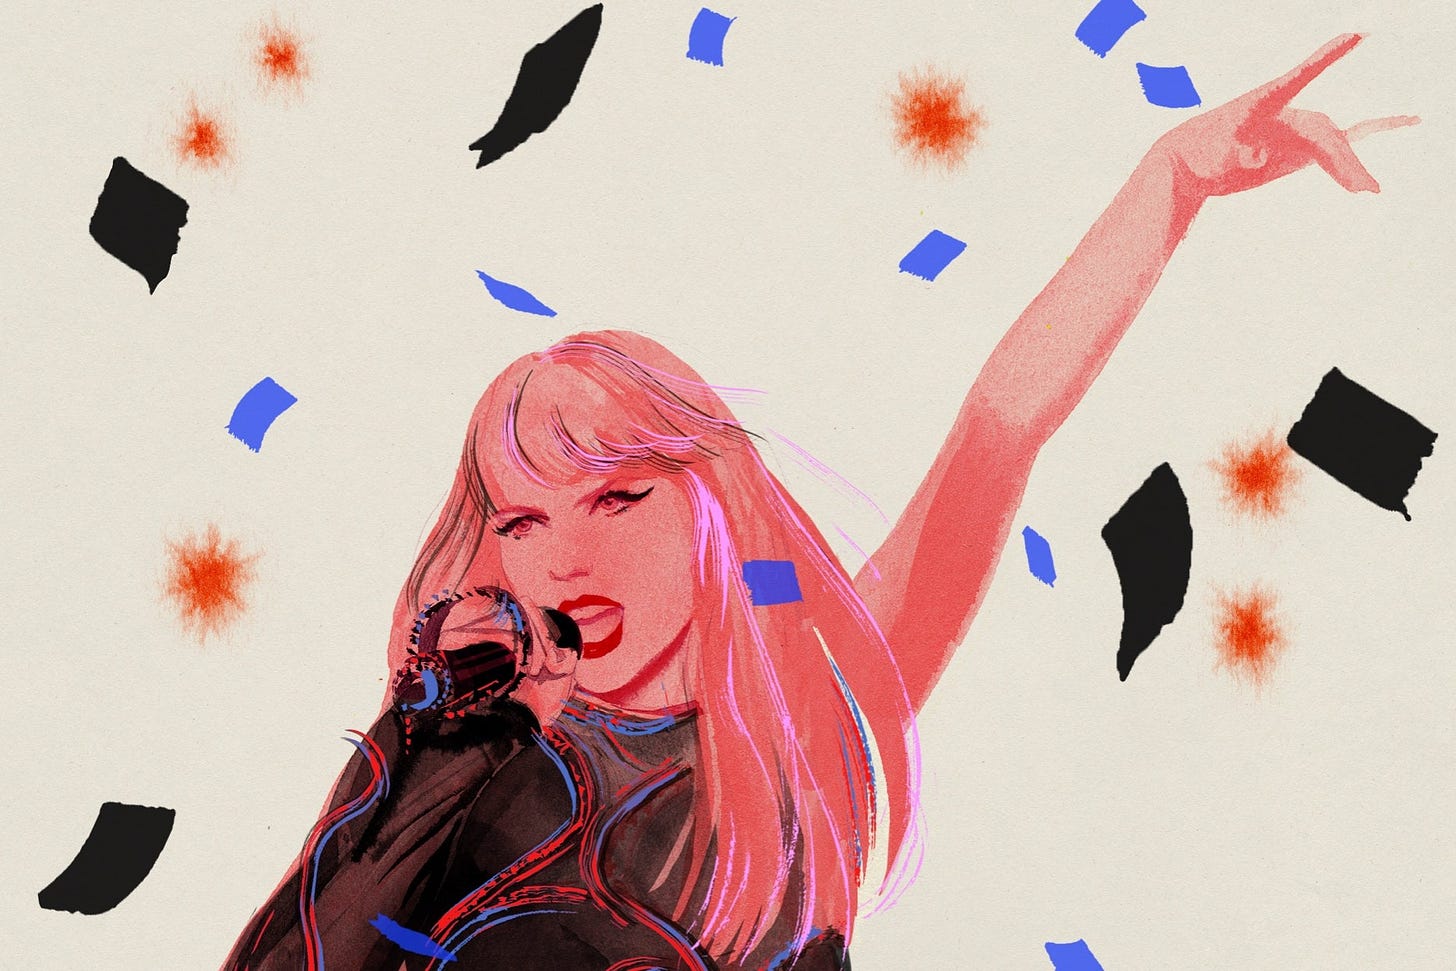 The Startling Intimacy of Taylor Swift's Eras Tour | The New Yorker